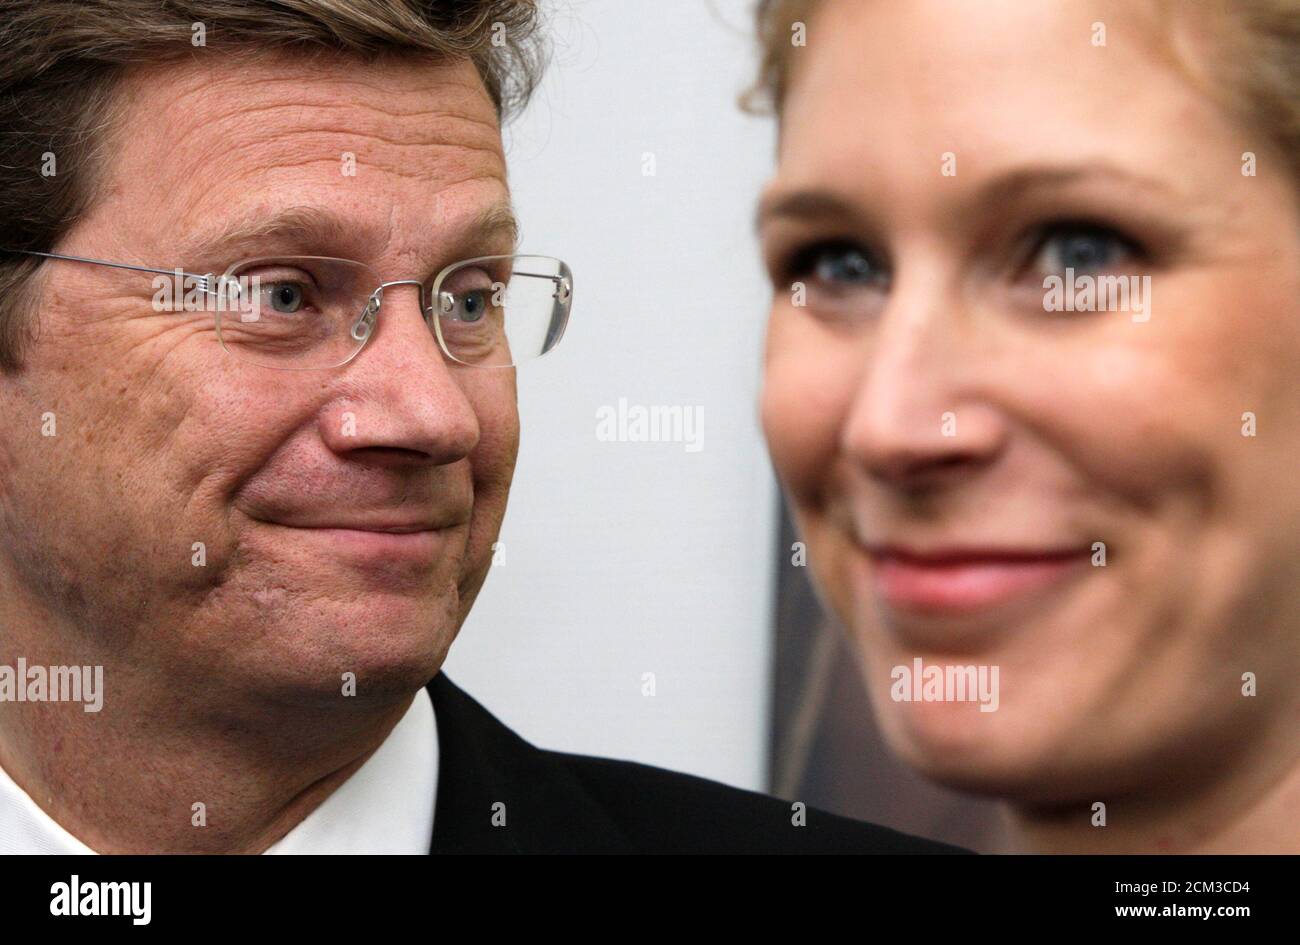 Free Democratic Party (FDP) party leader Guido Westerwelle (L) and his party's top EU candidate Silvana Koch-Mehrin attend a news briefing on the results of the European Parliament elections in the FDP party headquarters in Berlin June 8, 2009.  REUTERS/Thomas Peter  (GERMANY POLITICS ELECTIONS) Stock Photo